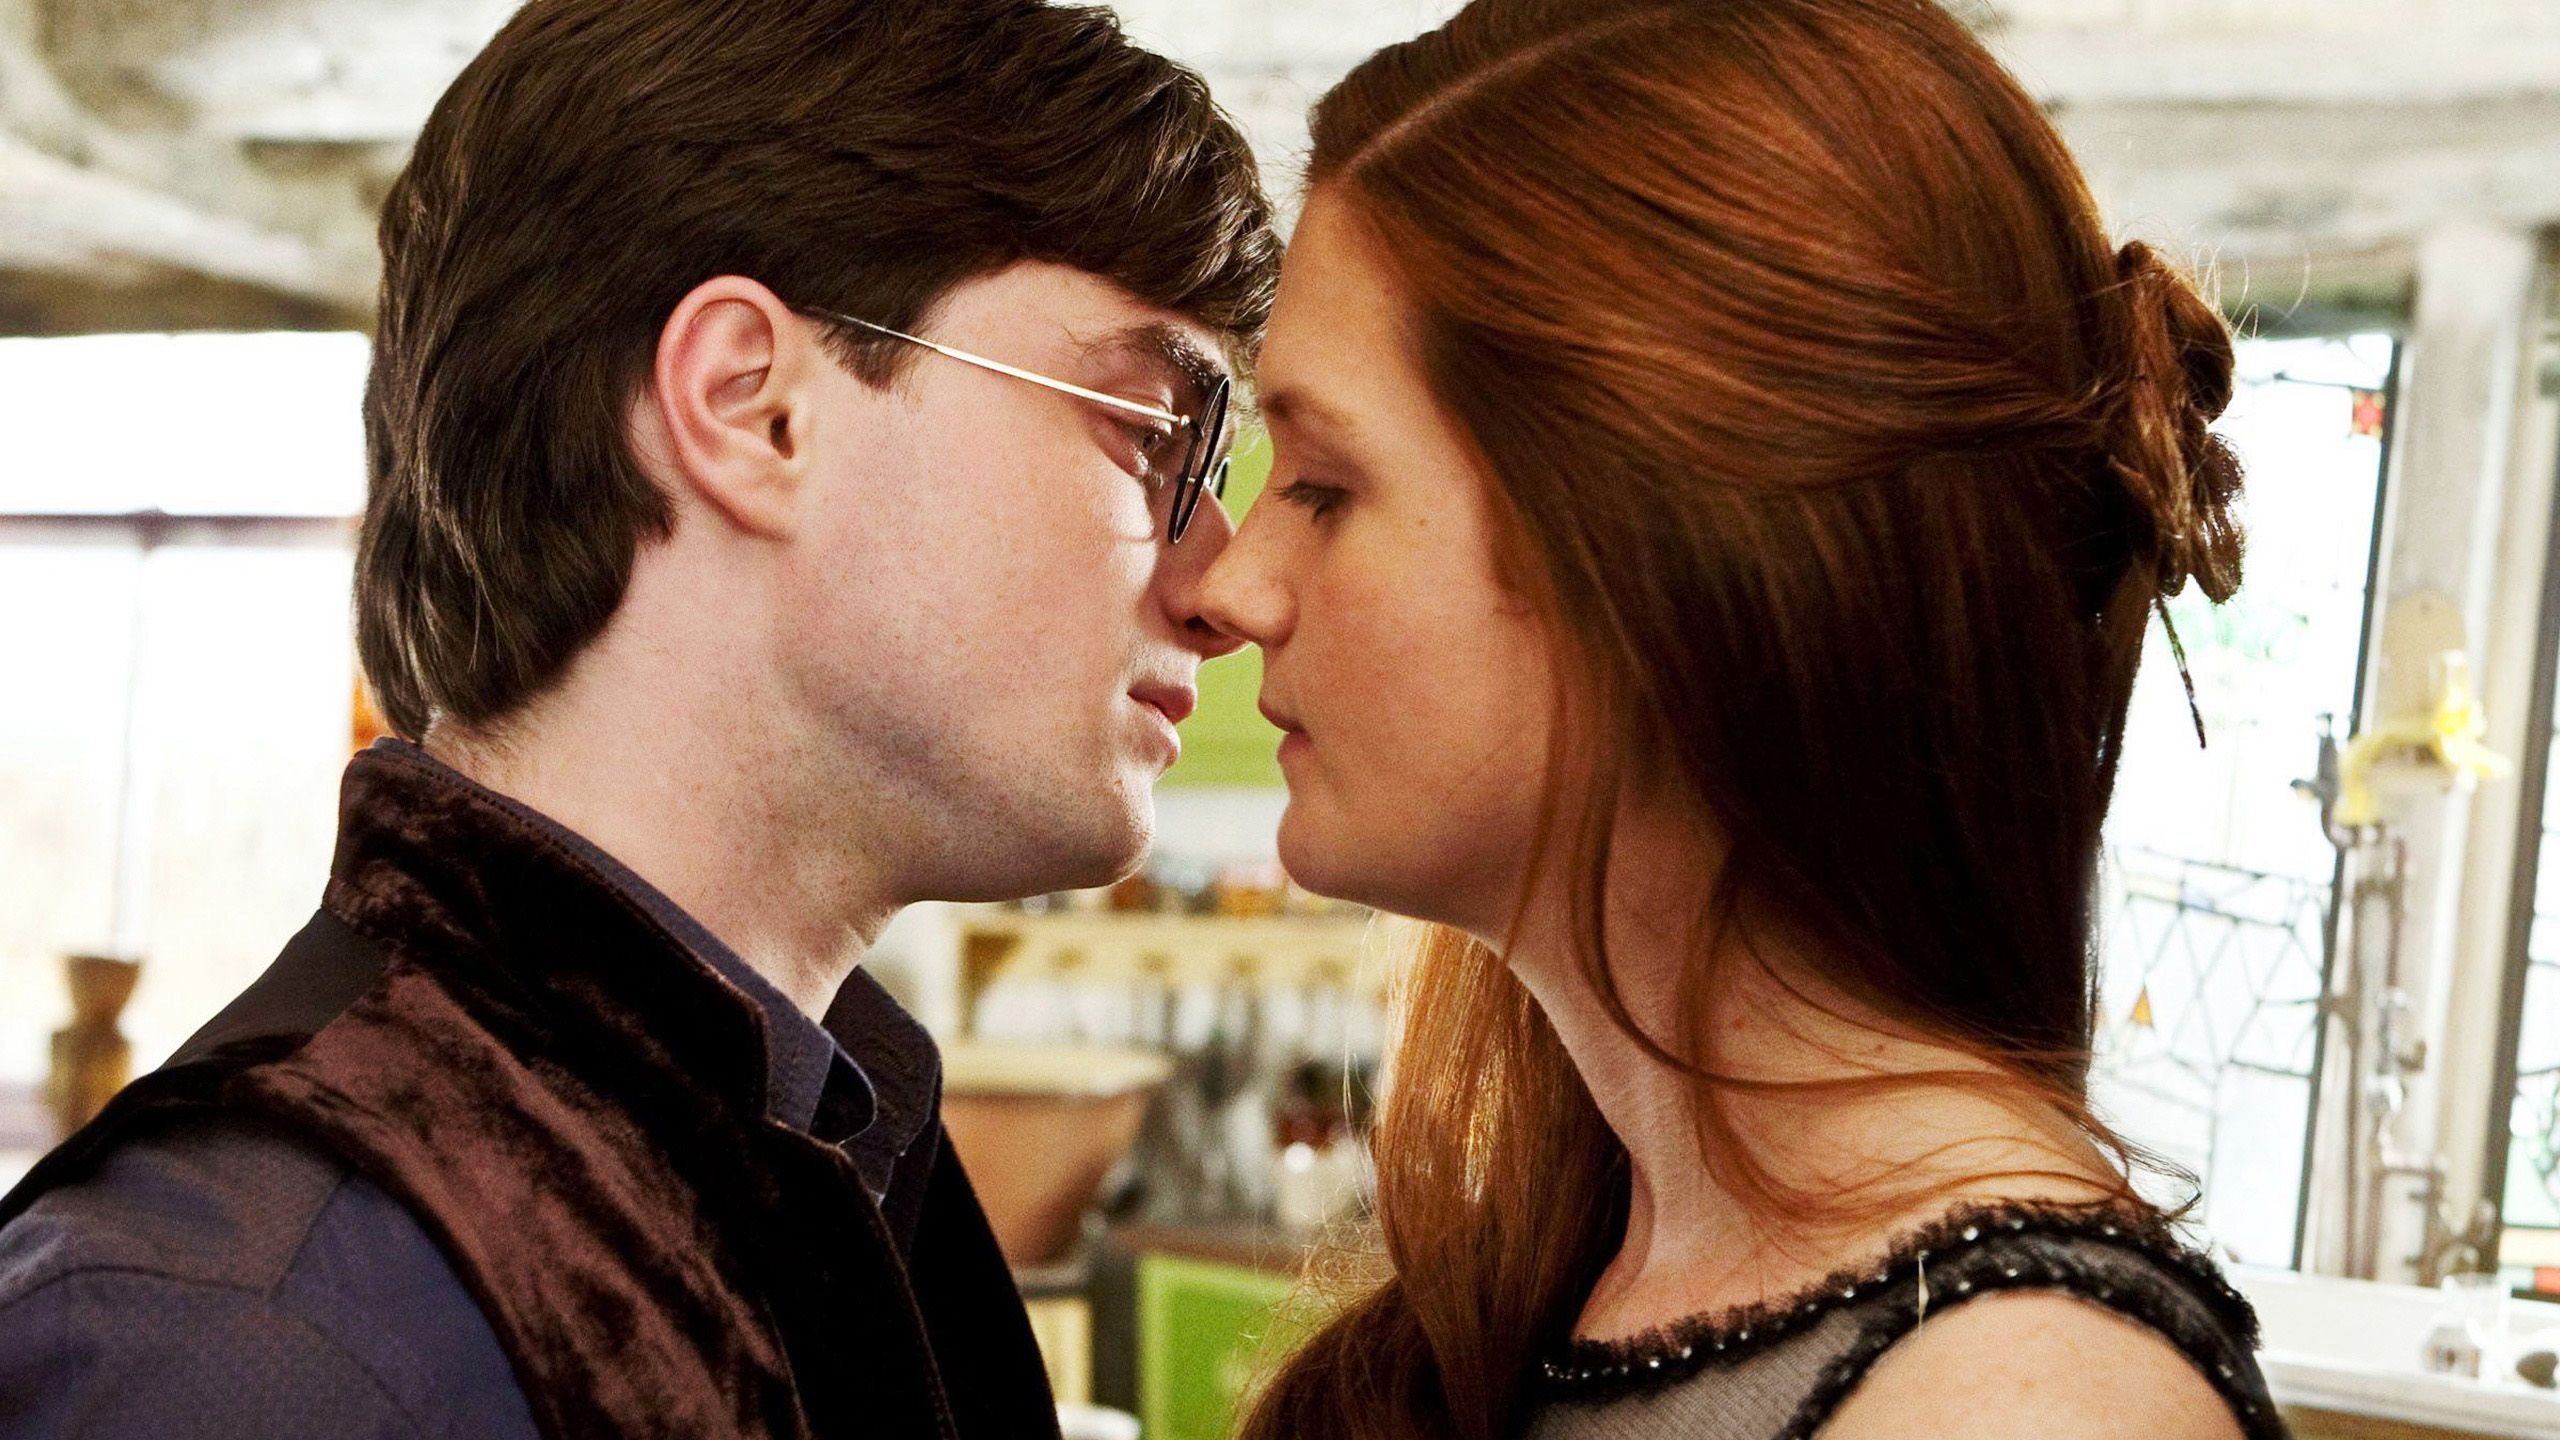 Harry Potter 25 Wild Revelations About Ginny And Harry’s Relationship Fans Didn’t Realize